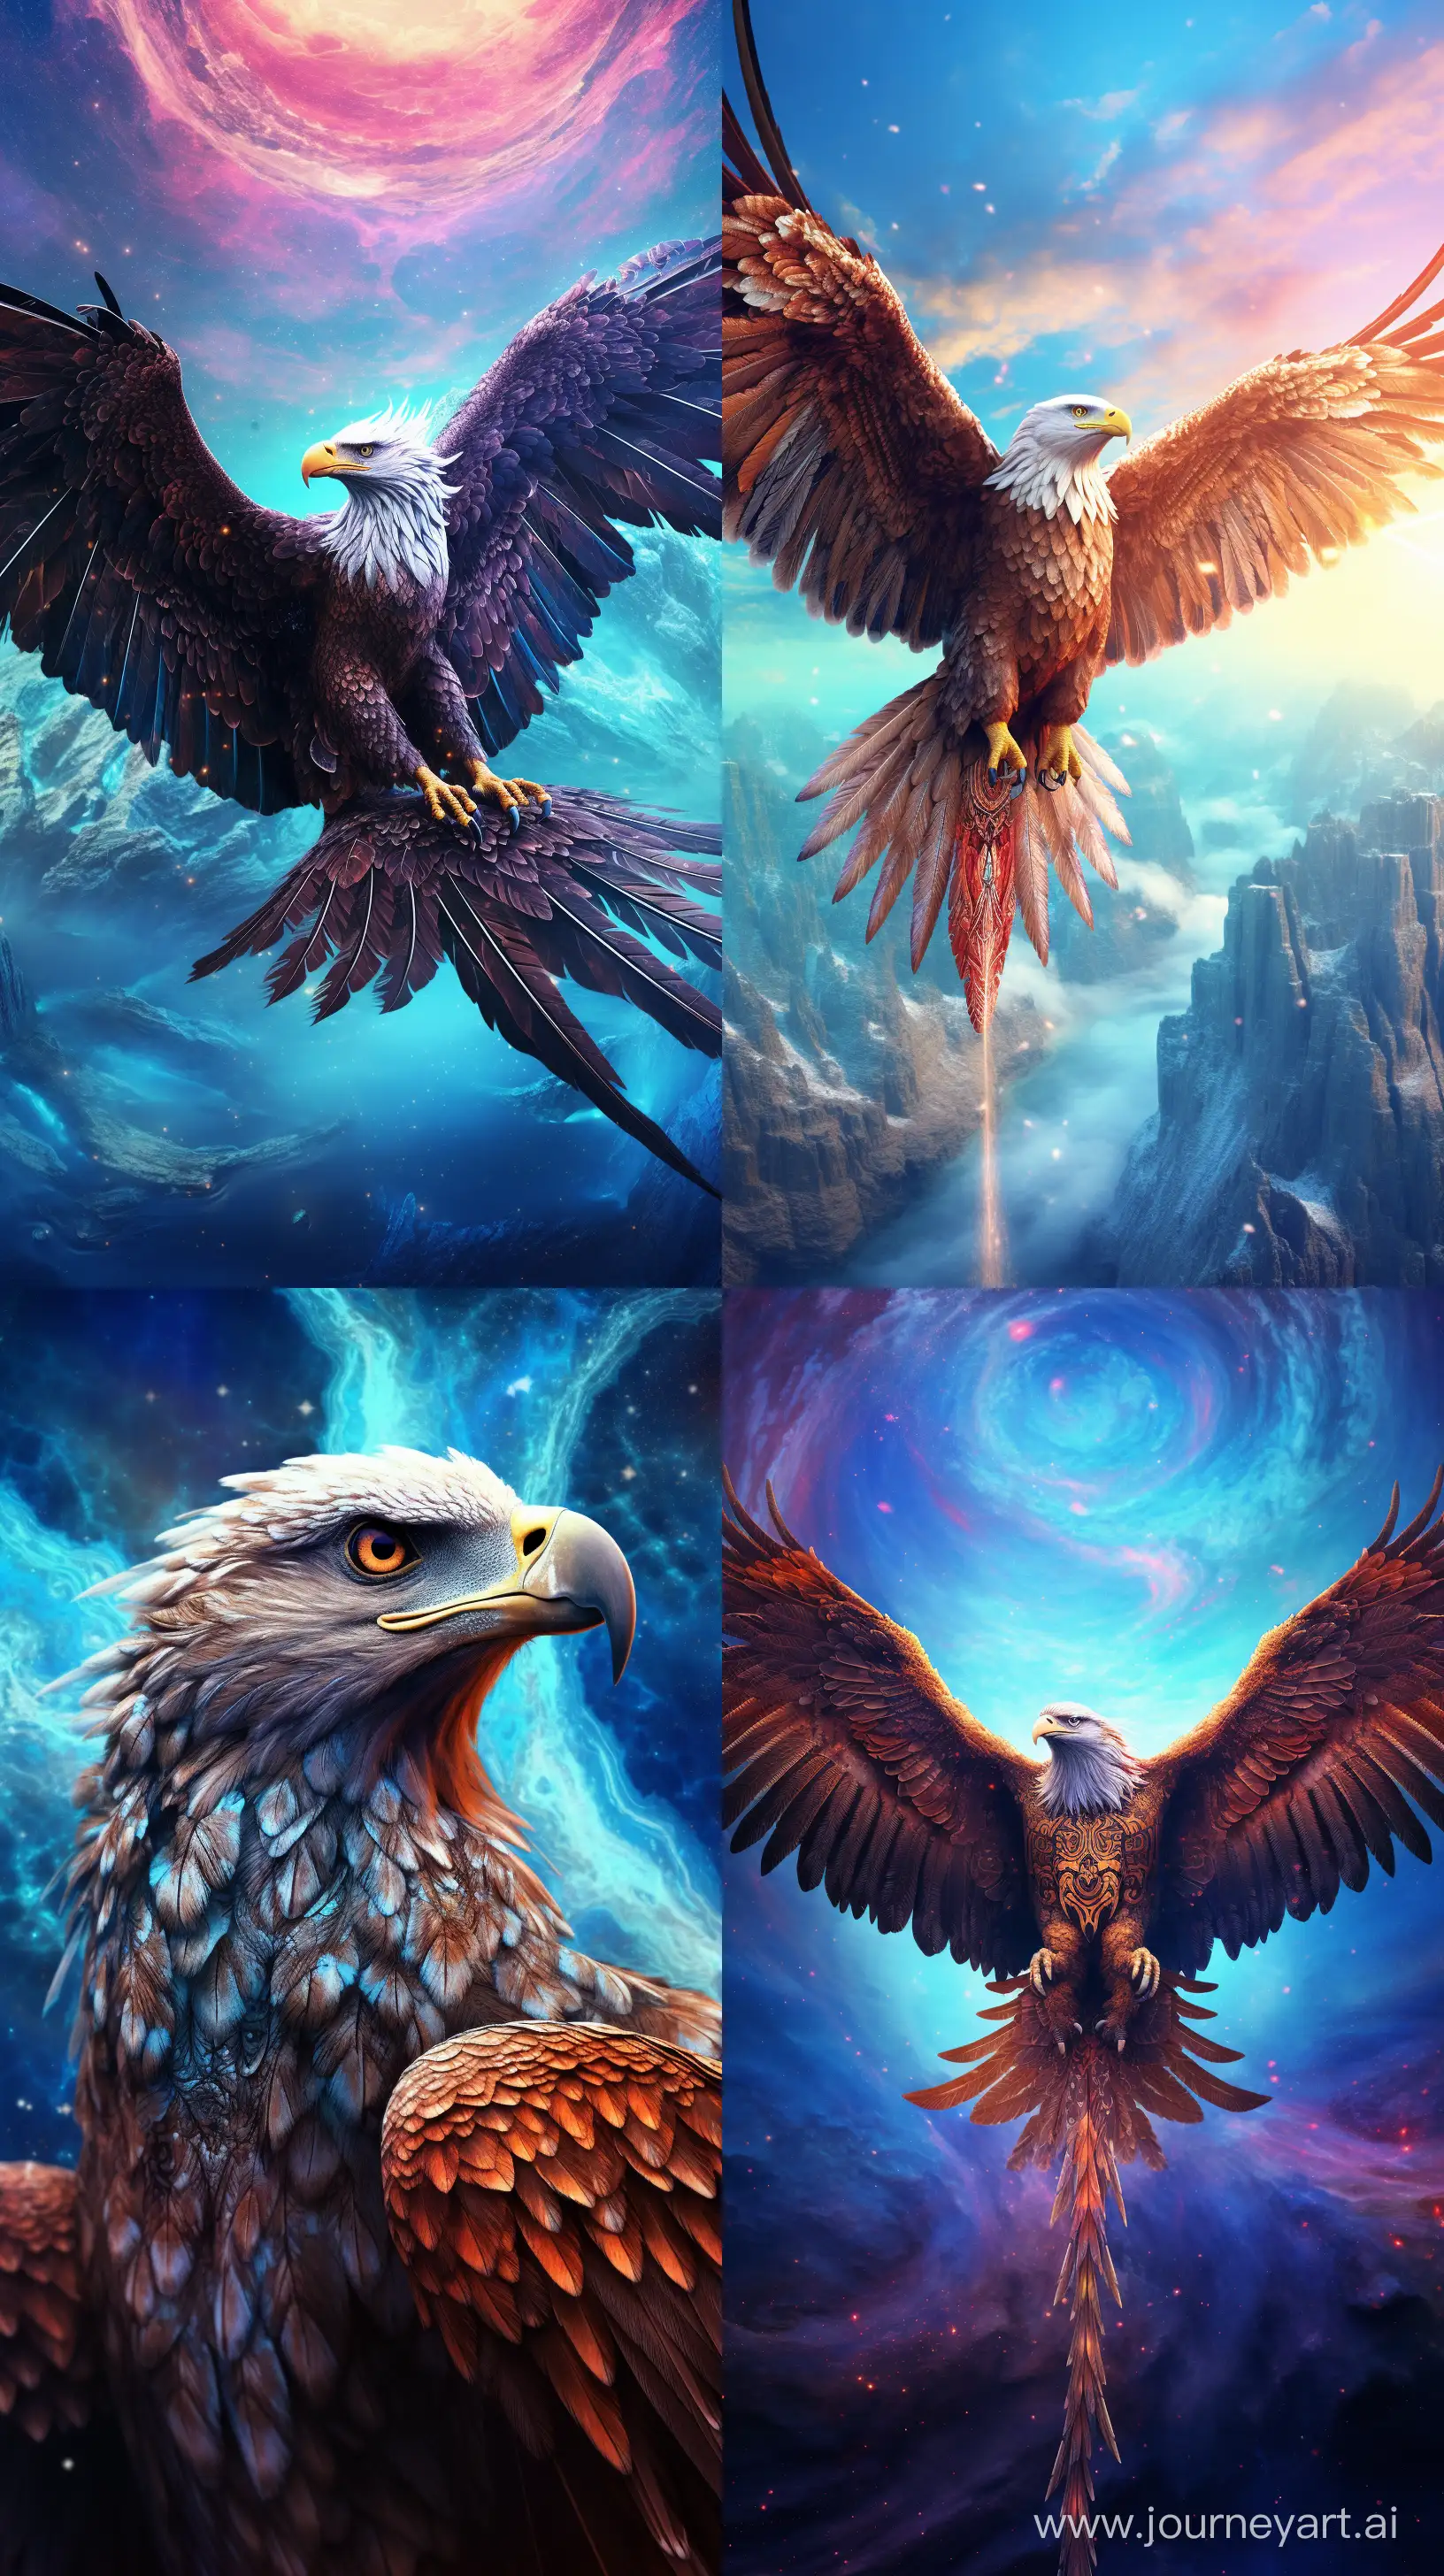 Majestic-Hindu-Mythical-Eagle-Intricately-Detailed-DualHeaded-Creature-Soaring-in-Celestial-Sky